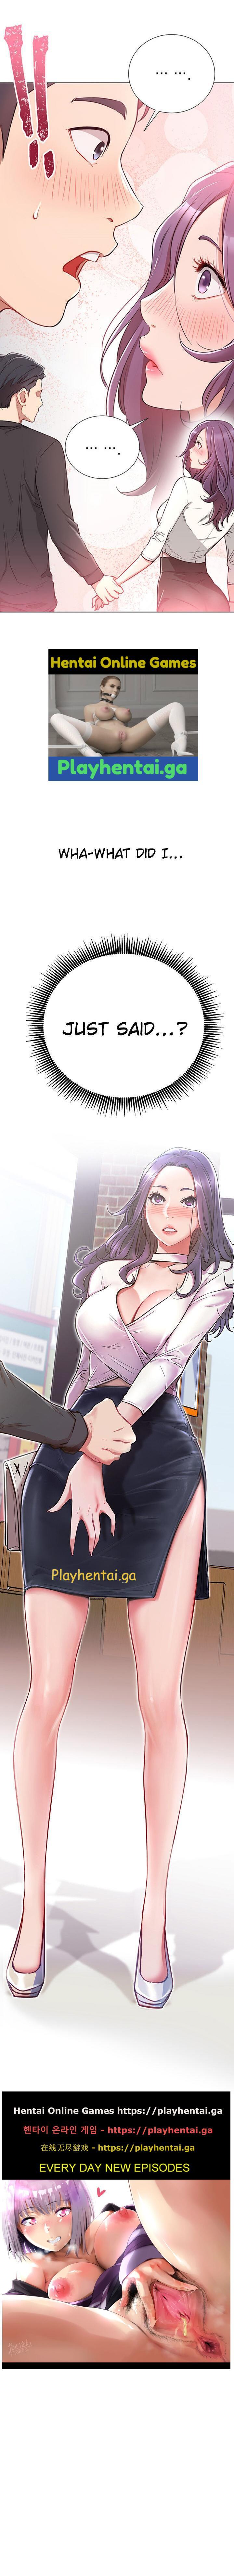 Bigblackcock LIVE WITH : DO YOU WANT TO DO IT Ch. 7 Pick Up - Page 10